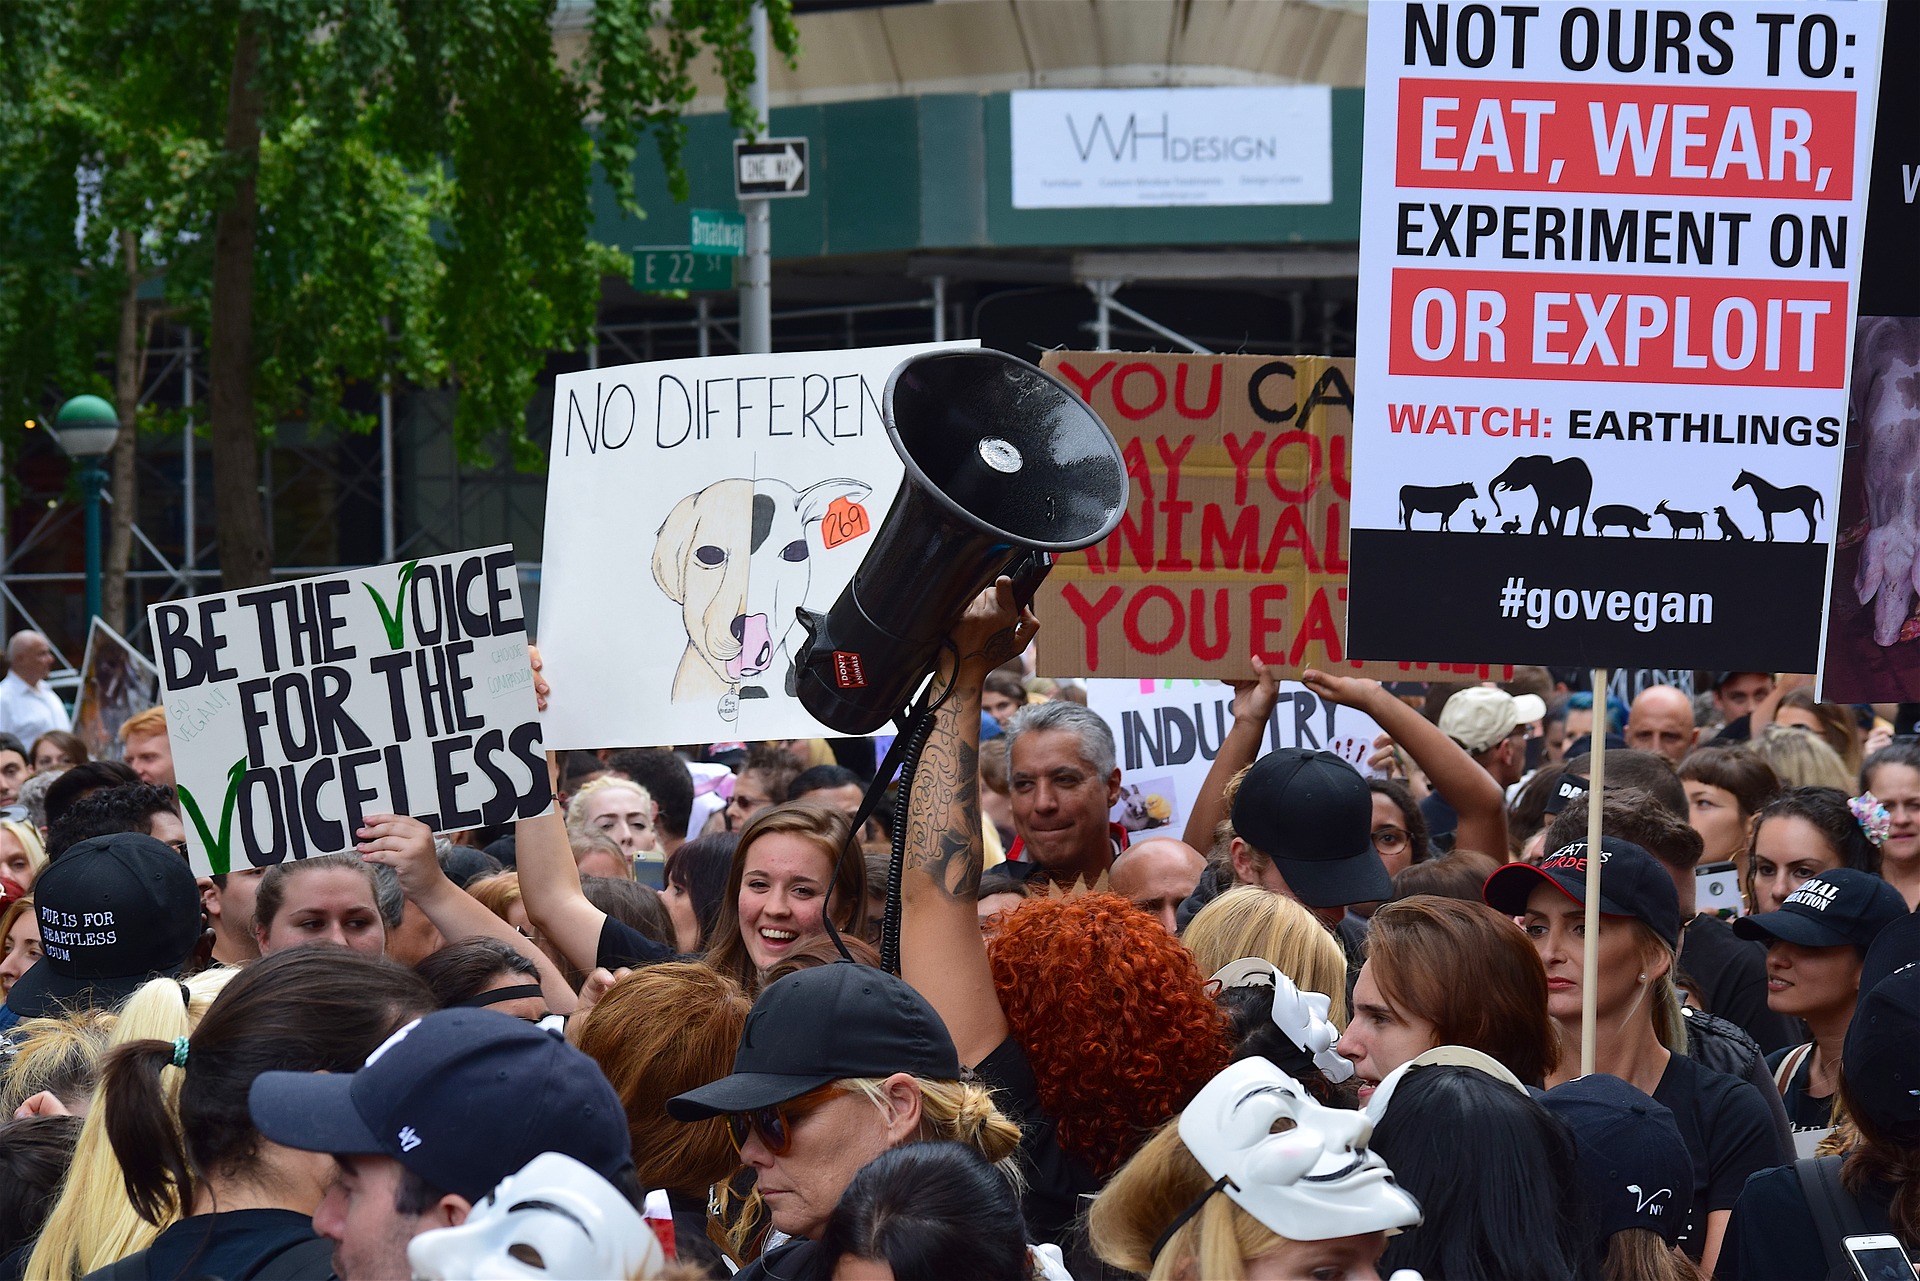 Picture of animal rights activists at a rally. Picture credit: https://pixabay.com/en/rally-march-protest-signs-2712259/